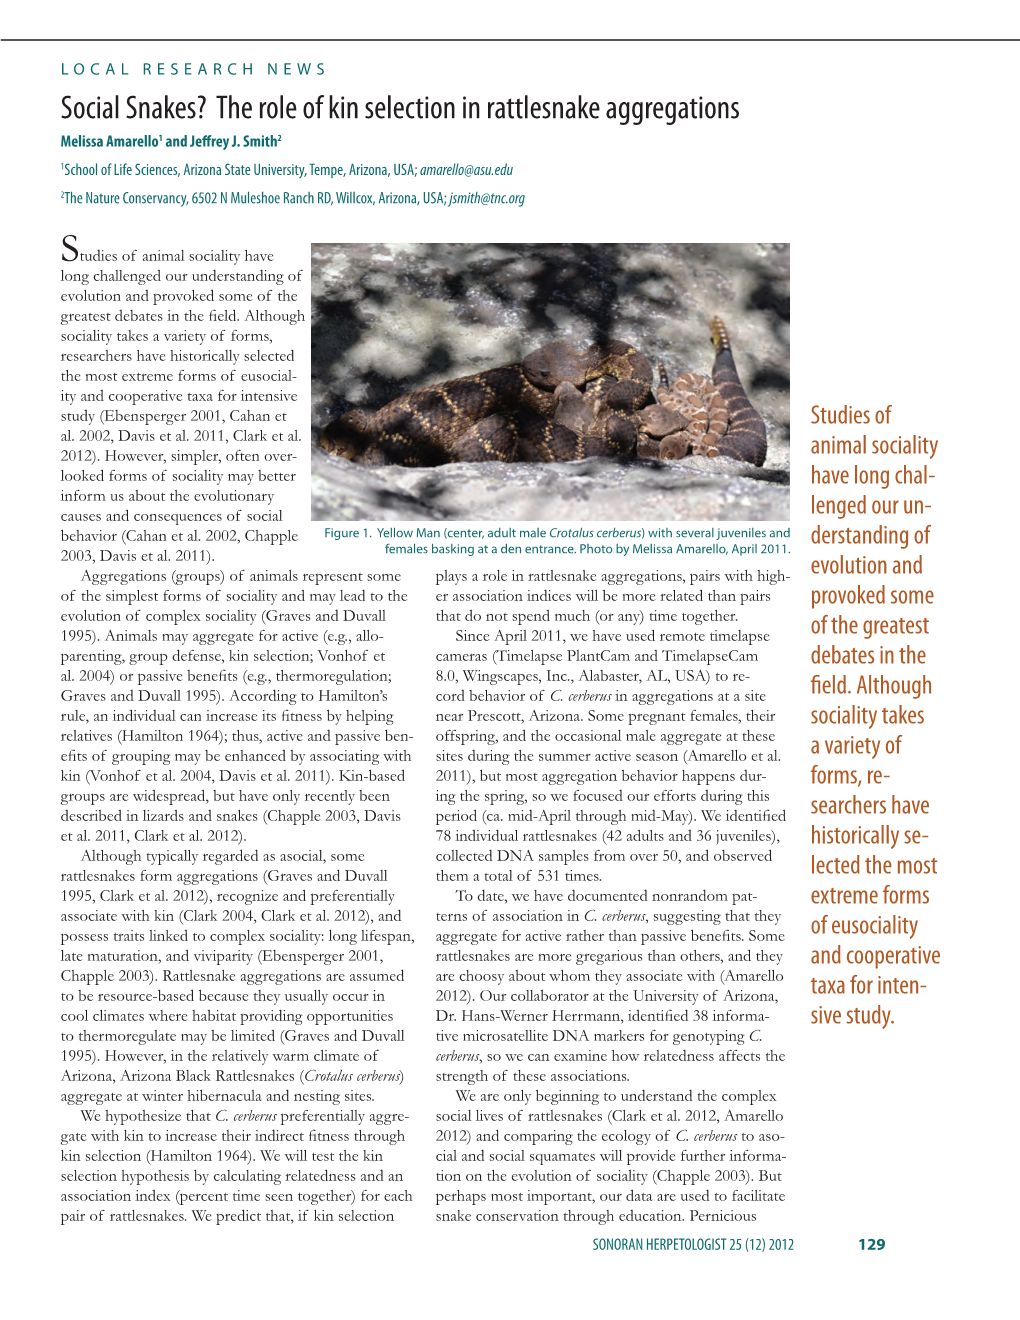 Social Snakes? the Role of Kin Selection in Rattlesnake Aggregations Melissa Amarello1 and Jeffrey J